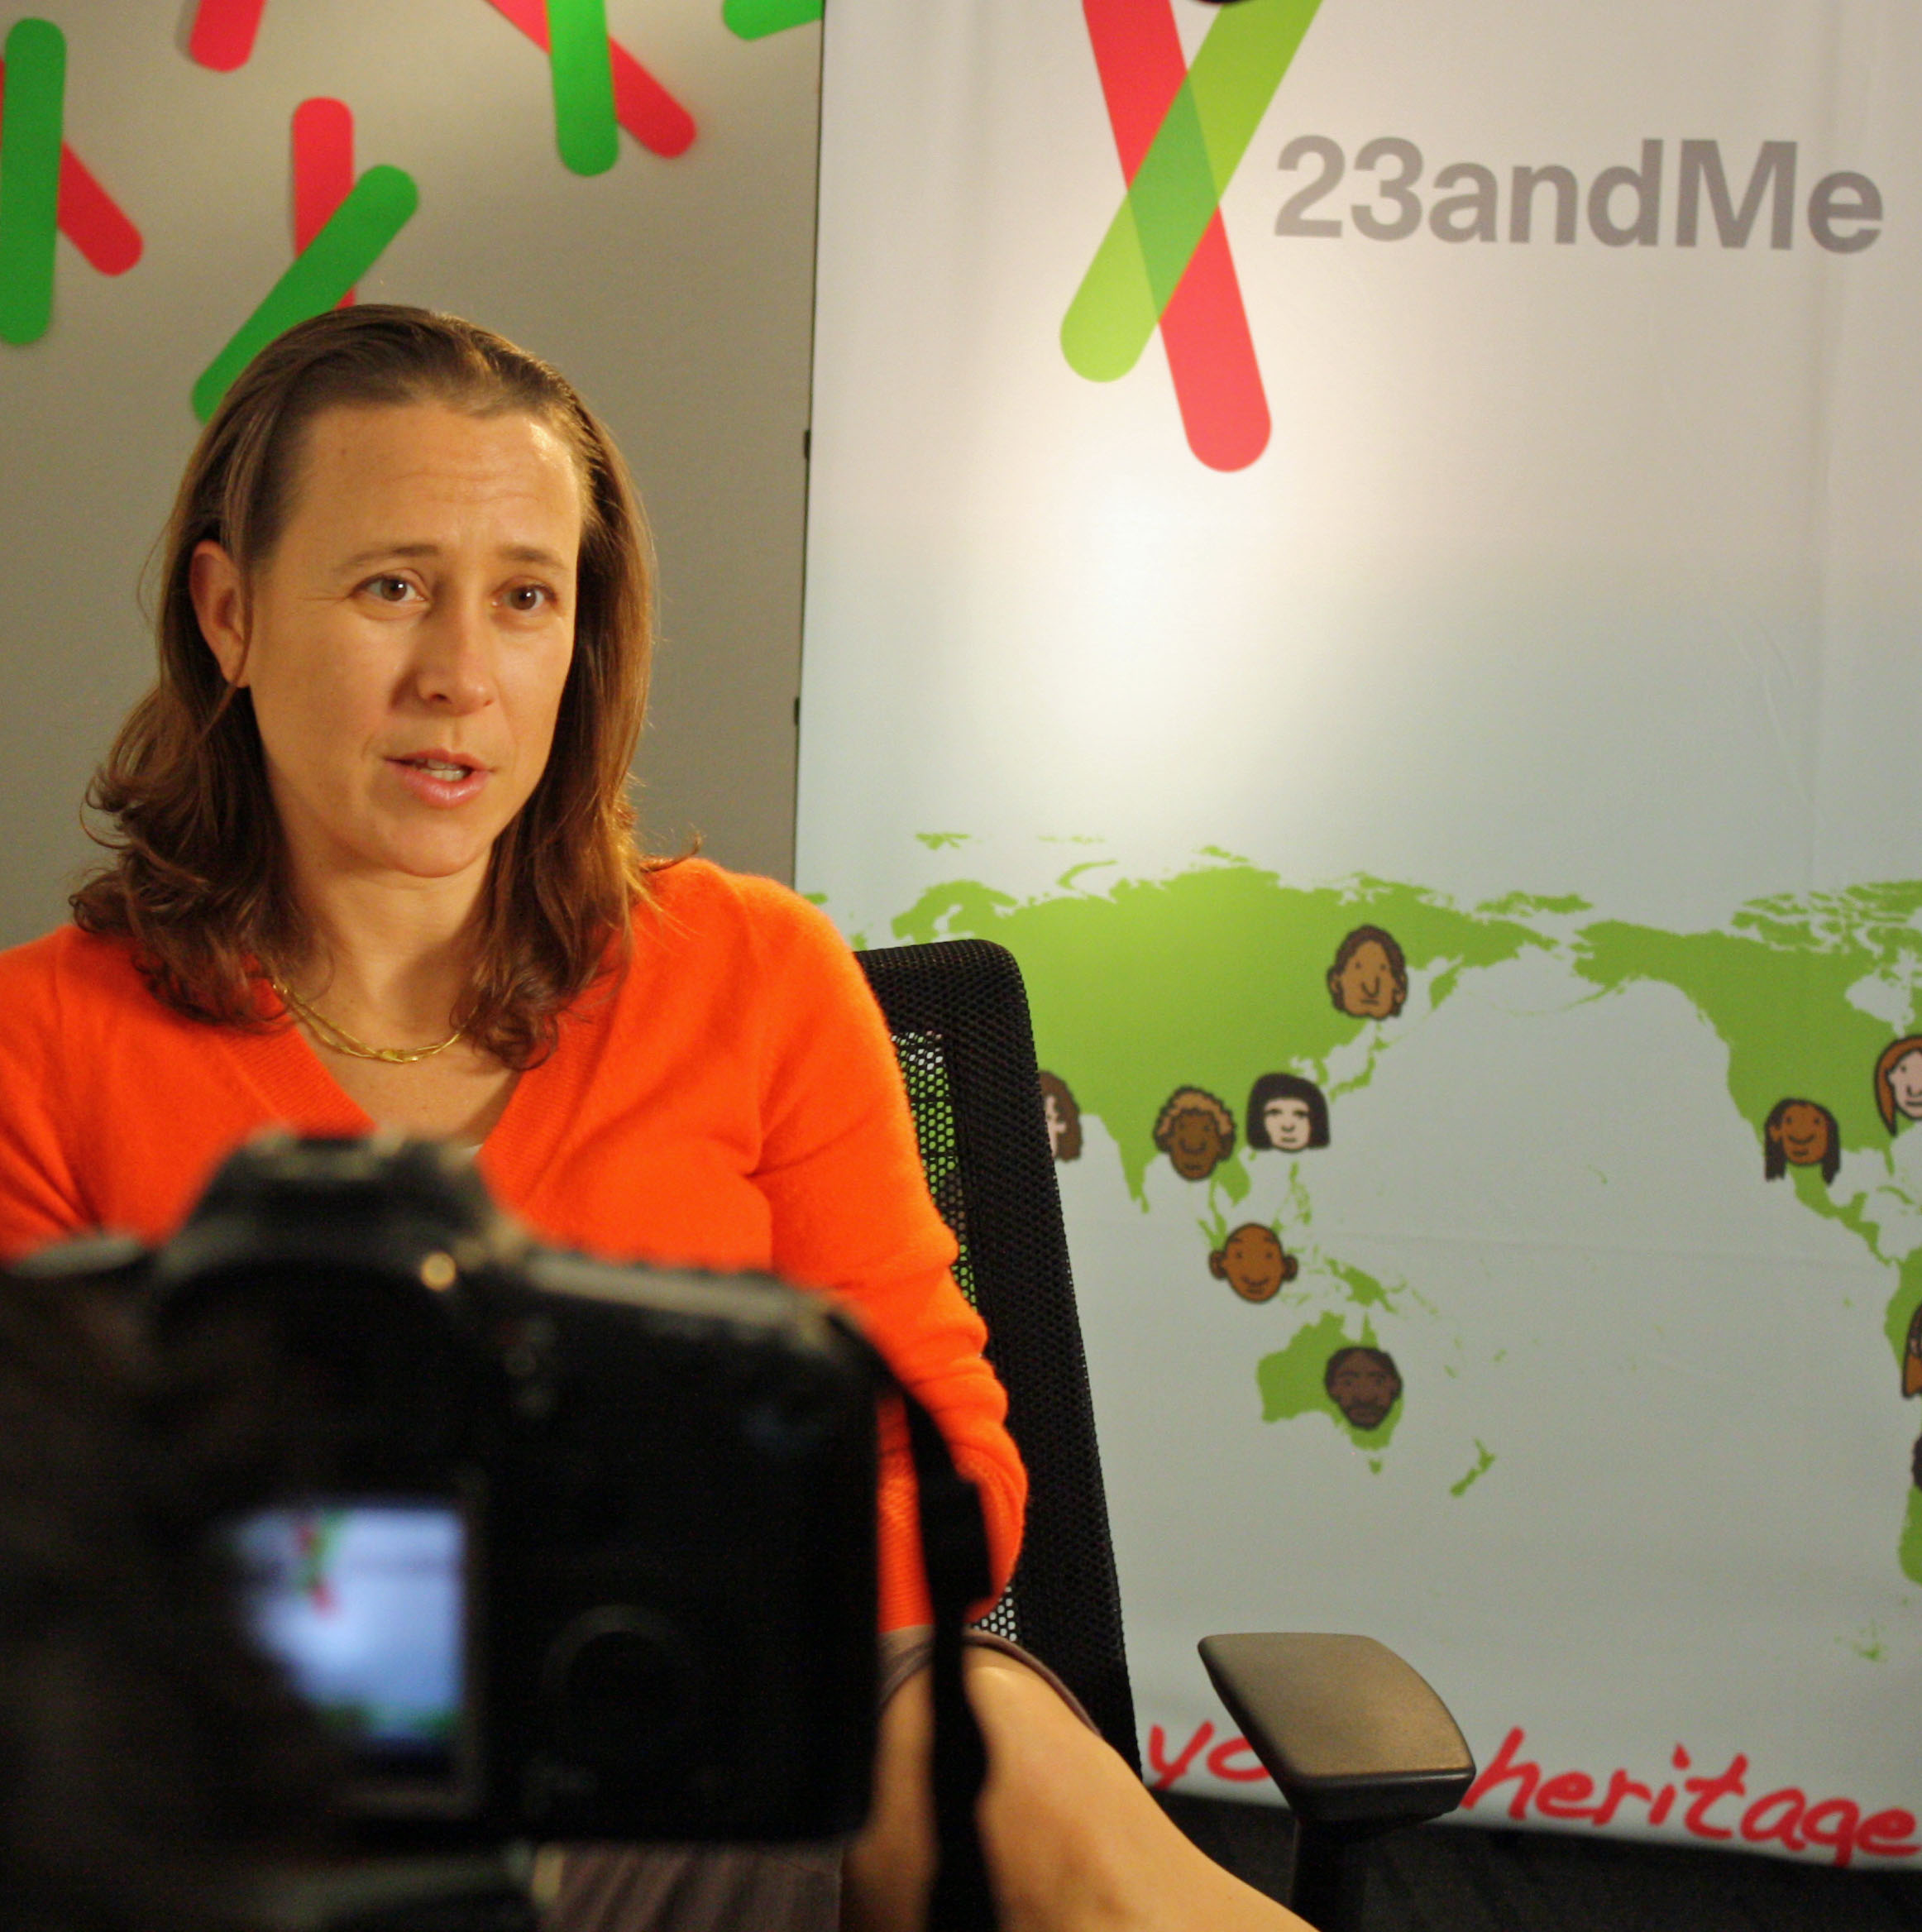 It was a first for the direct-to-consumer genetic testing industry when 23andMe filed 510(k) applications with the Food & Drug Administration to get agency clearance for seven of its genetic tests. Pictured above is 23andMe co-founder Anne Wojcicki. (Photo by 23andMe.)